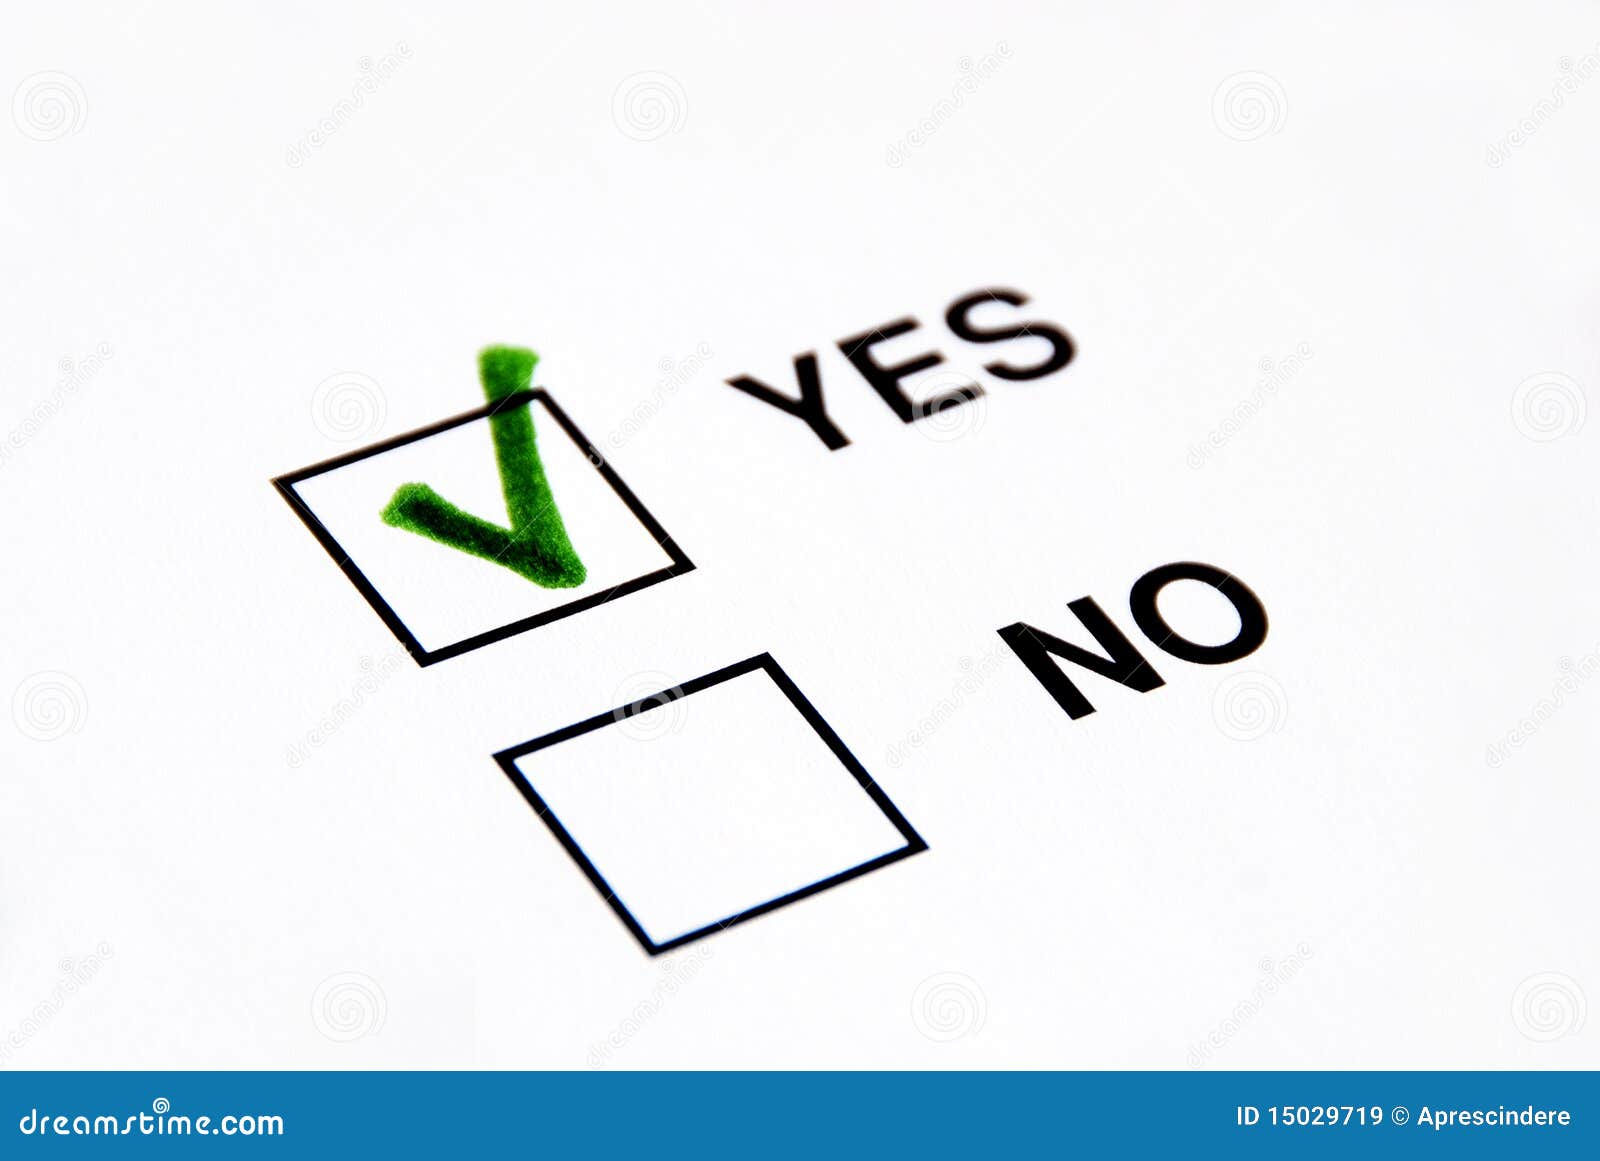 free clipart vote yes - photo #15